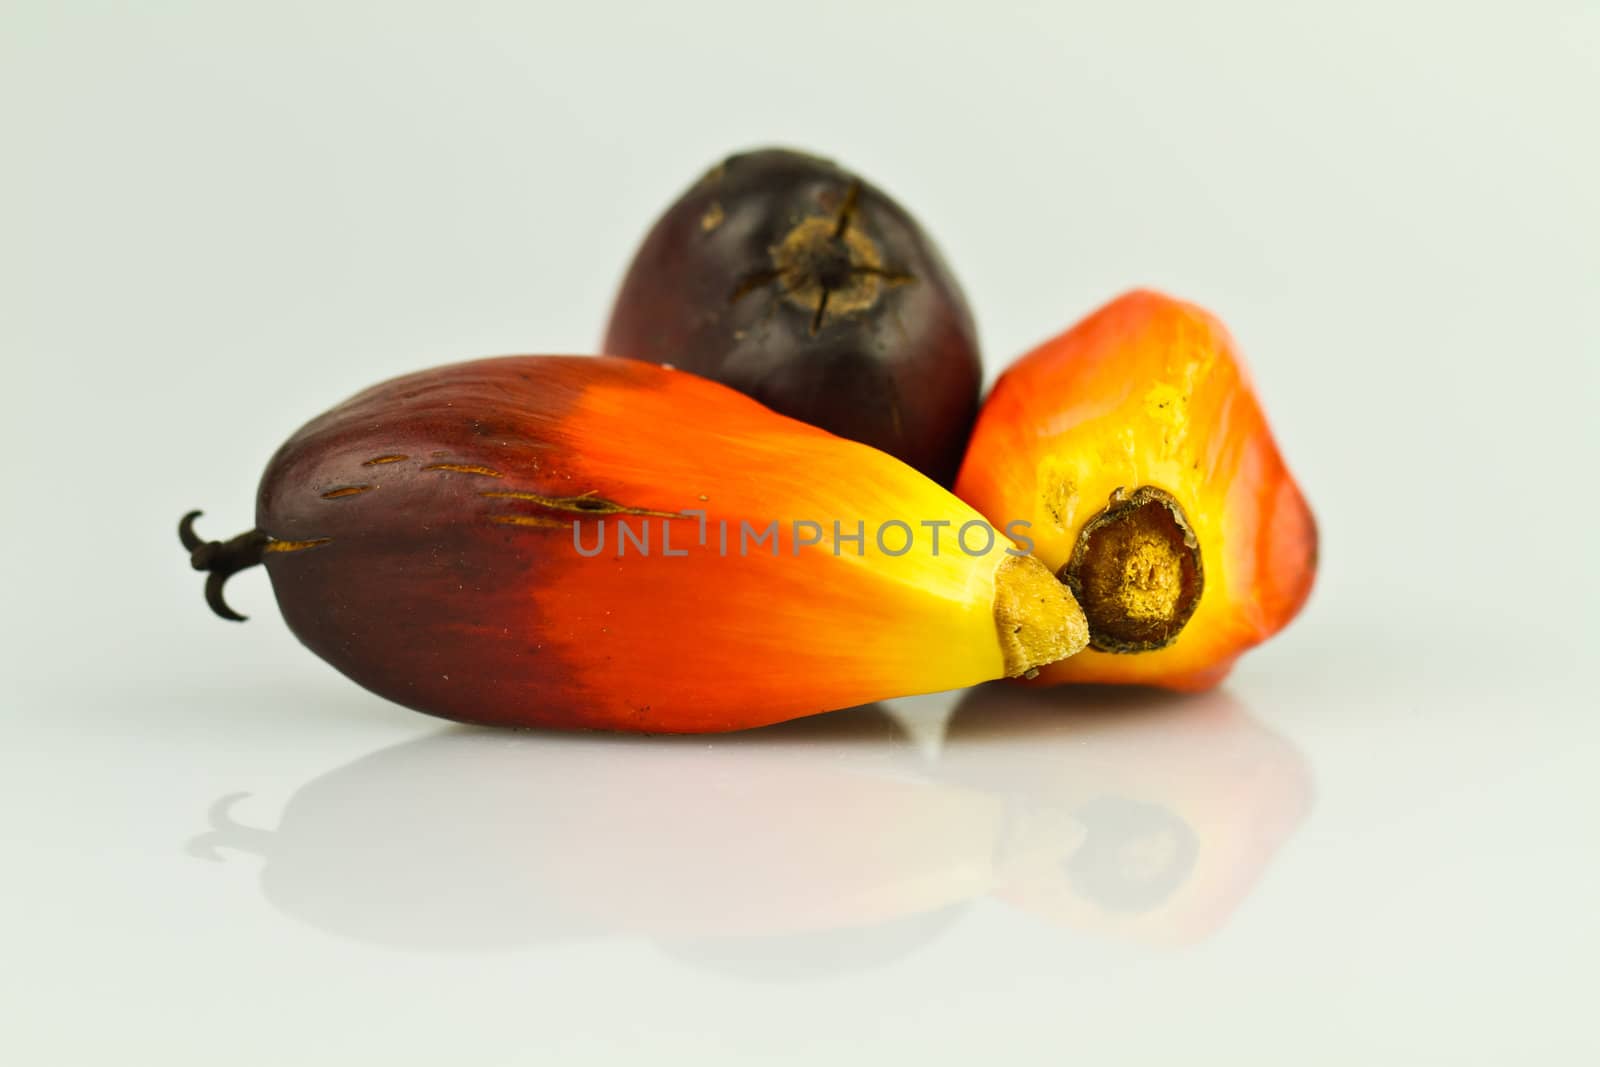 three oil palm seed on a reflecting white surface